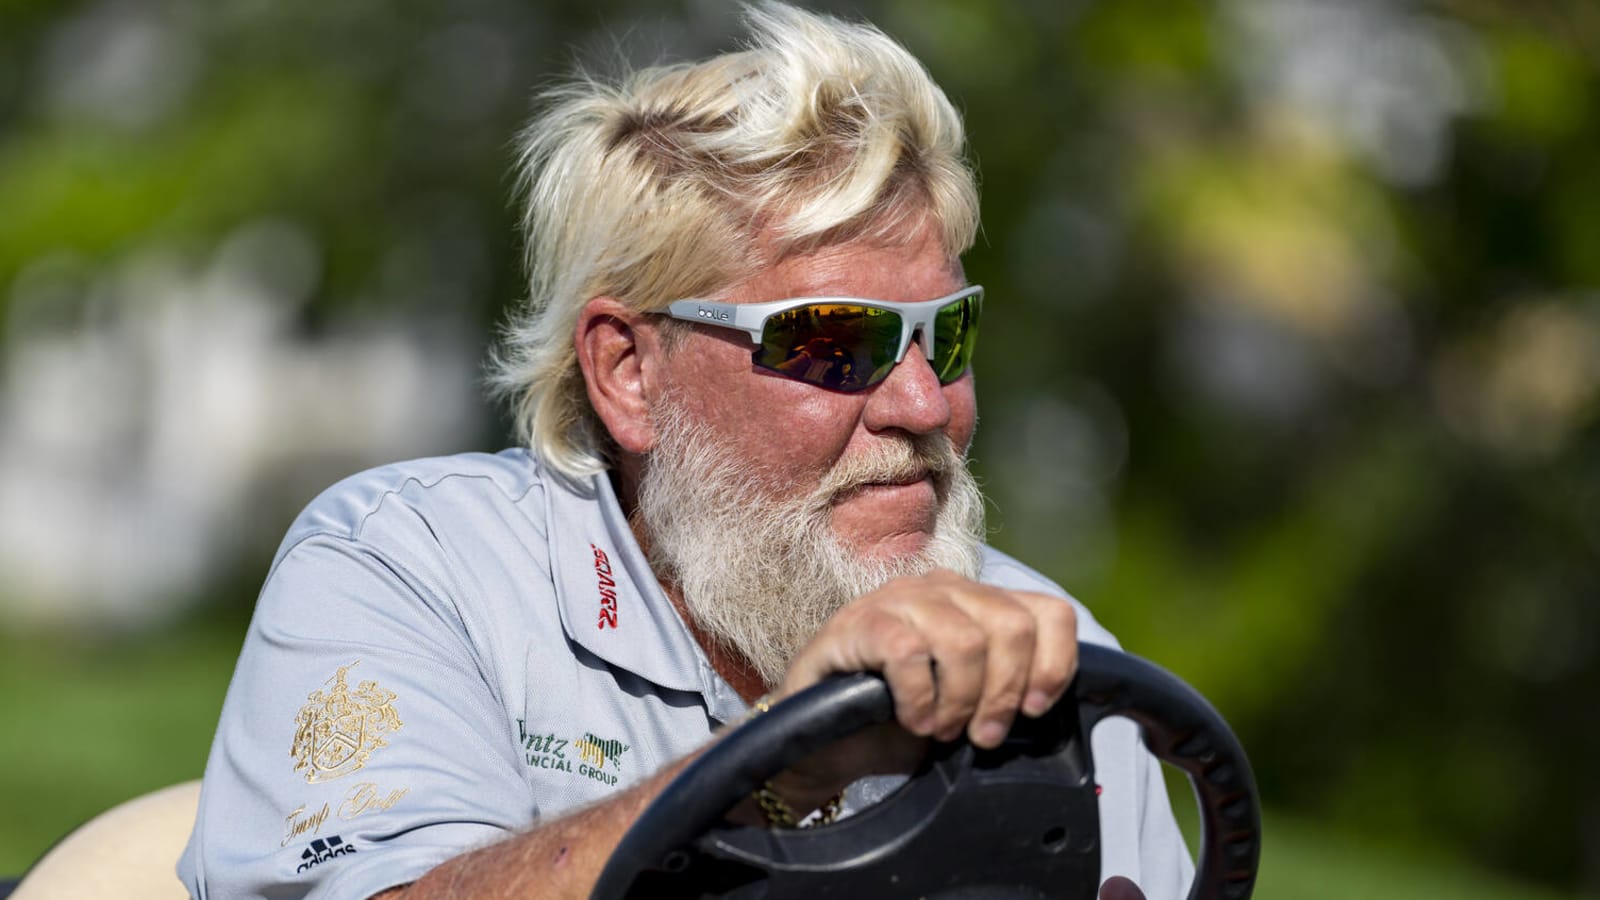 John Daly admits he is drunk during TV appearance on SEC Network